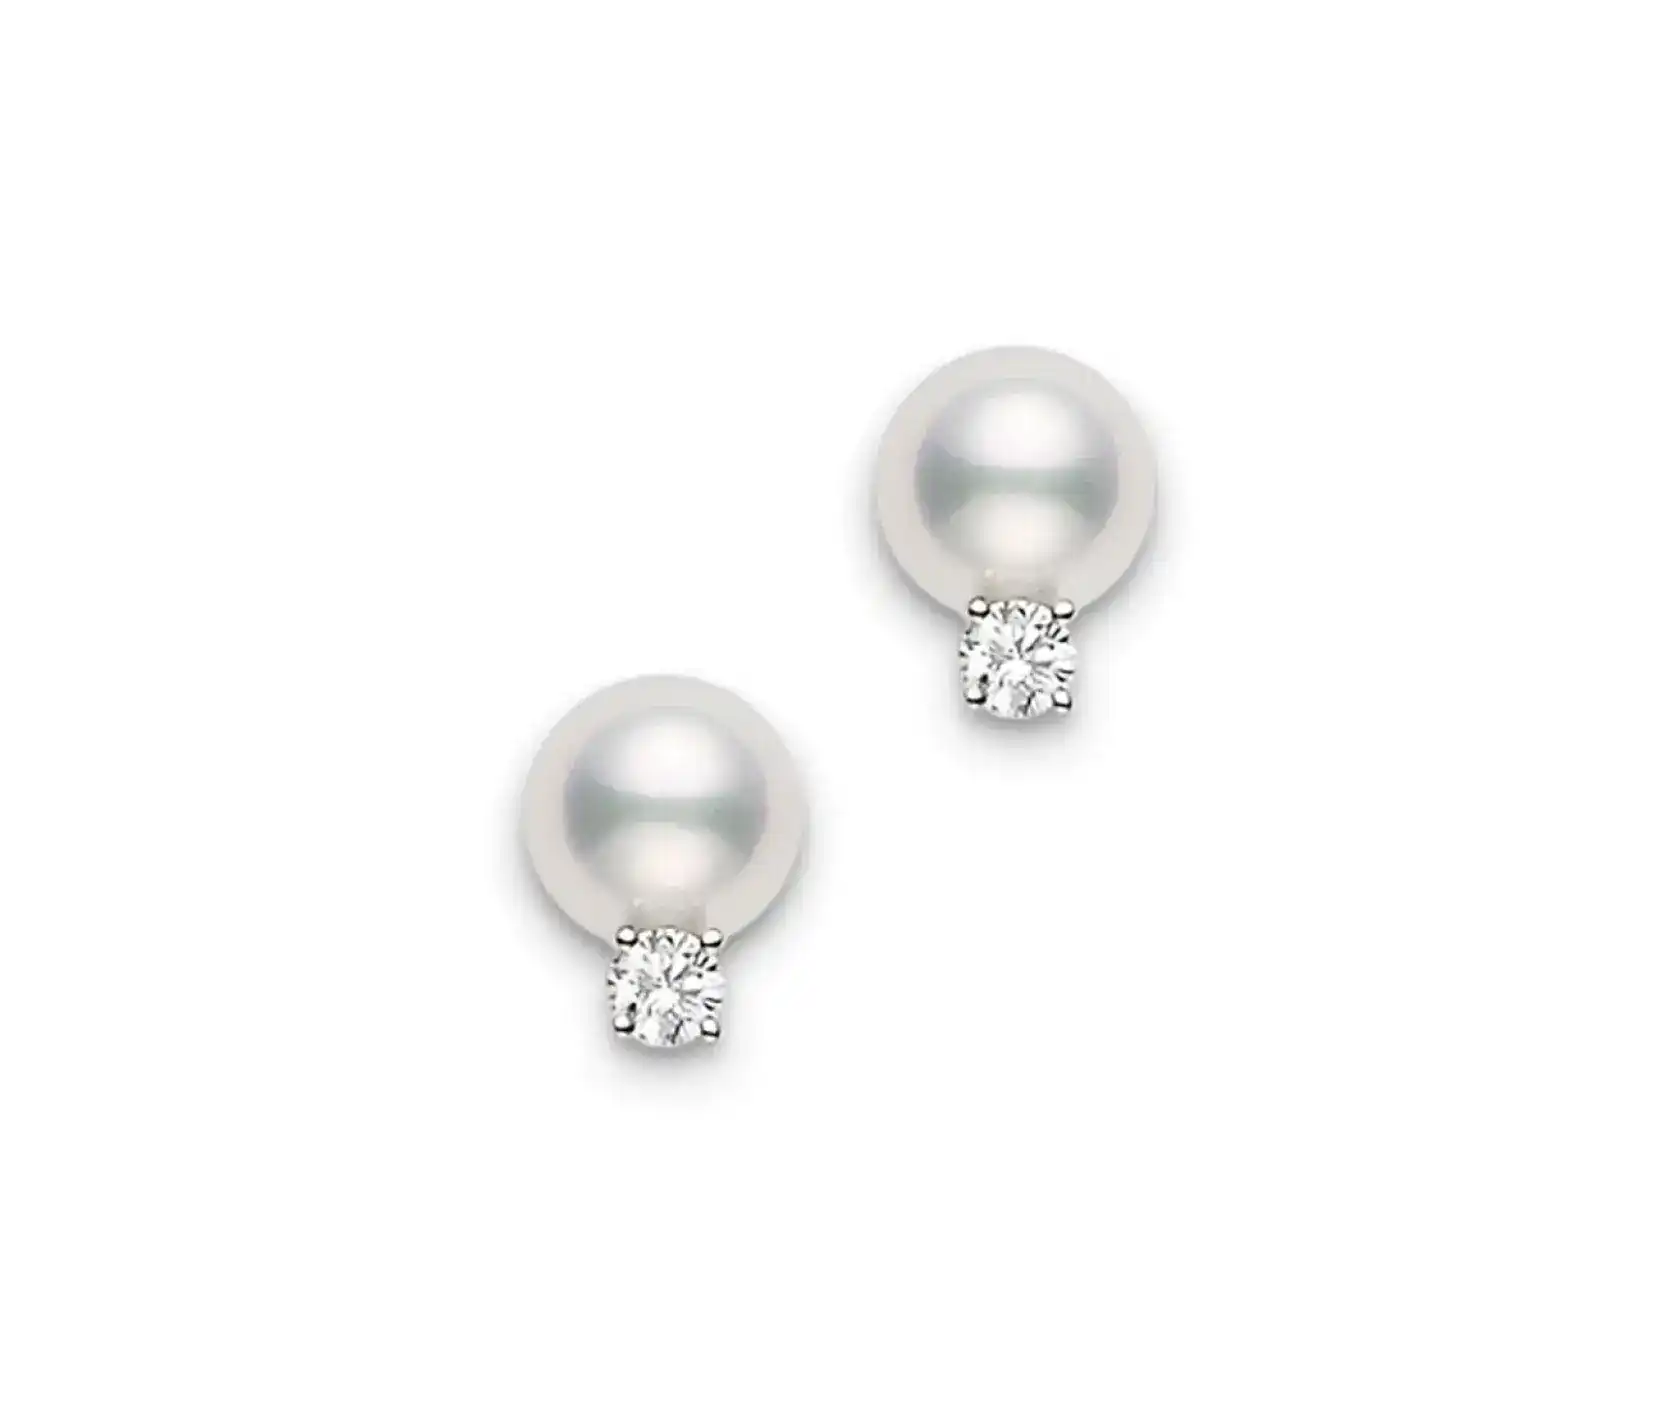 Small Akoya Saltwater Pearl Earrings 6-6.5mm On 9K White Gold